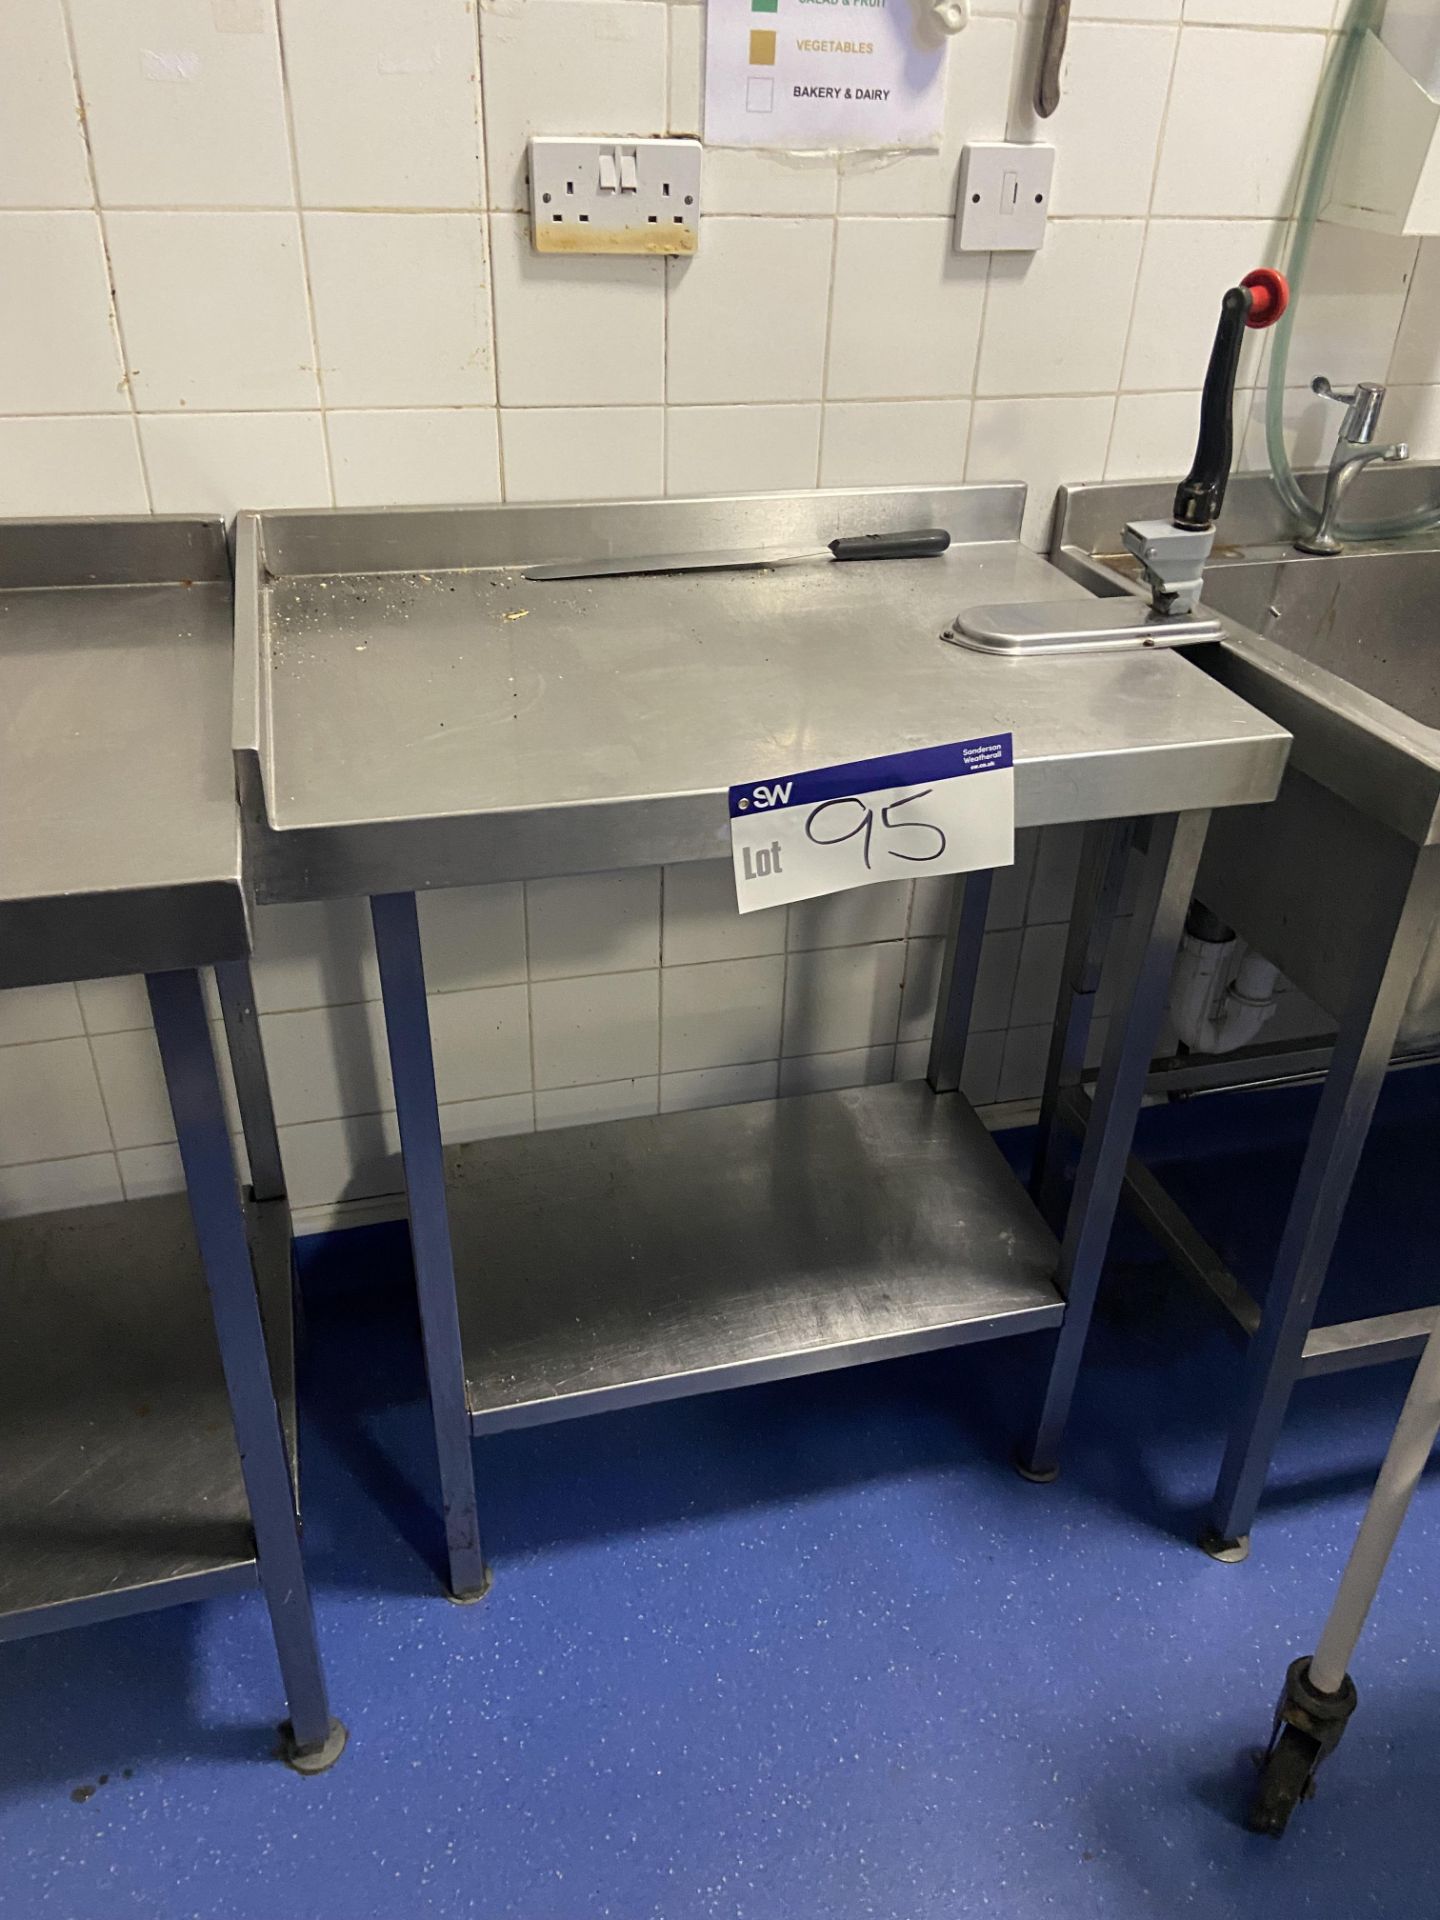 Stainless Steel Two Tier Bench, approx. 750m x 500mm Please read the following important